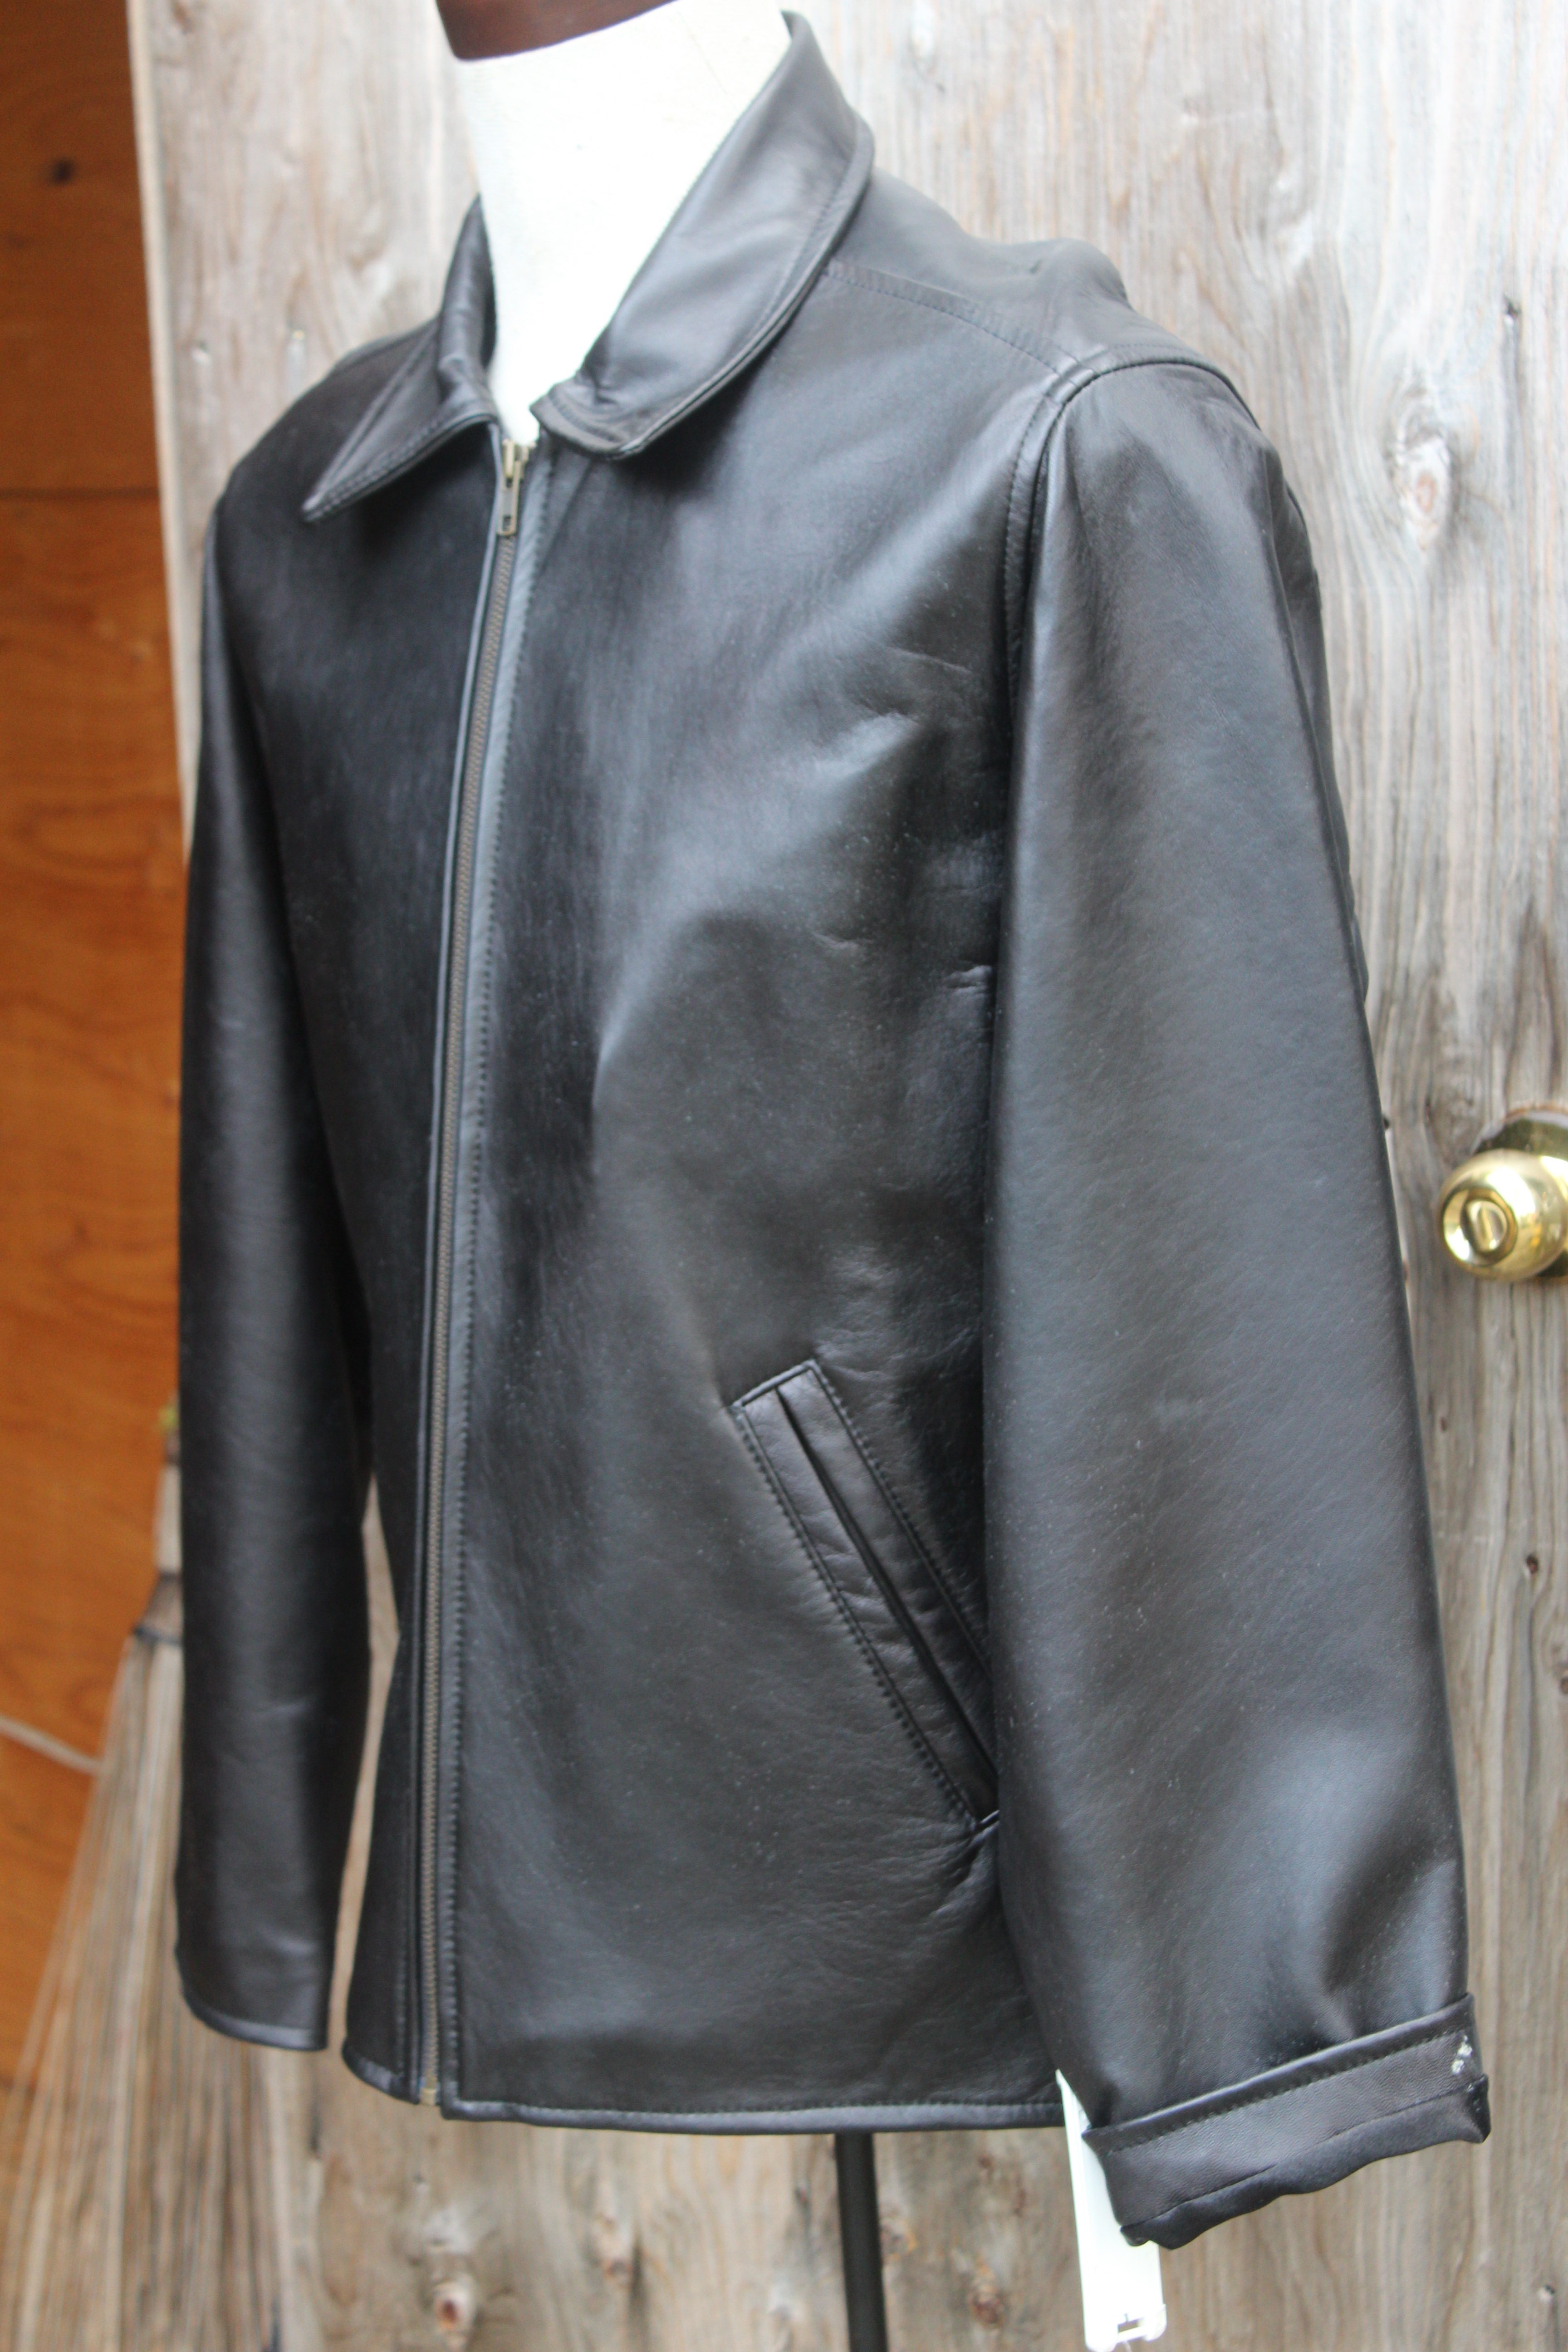 Black Leather- $199.95
Bainton's Tannery
Style #: 9720